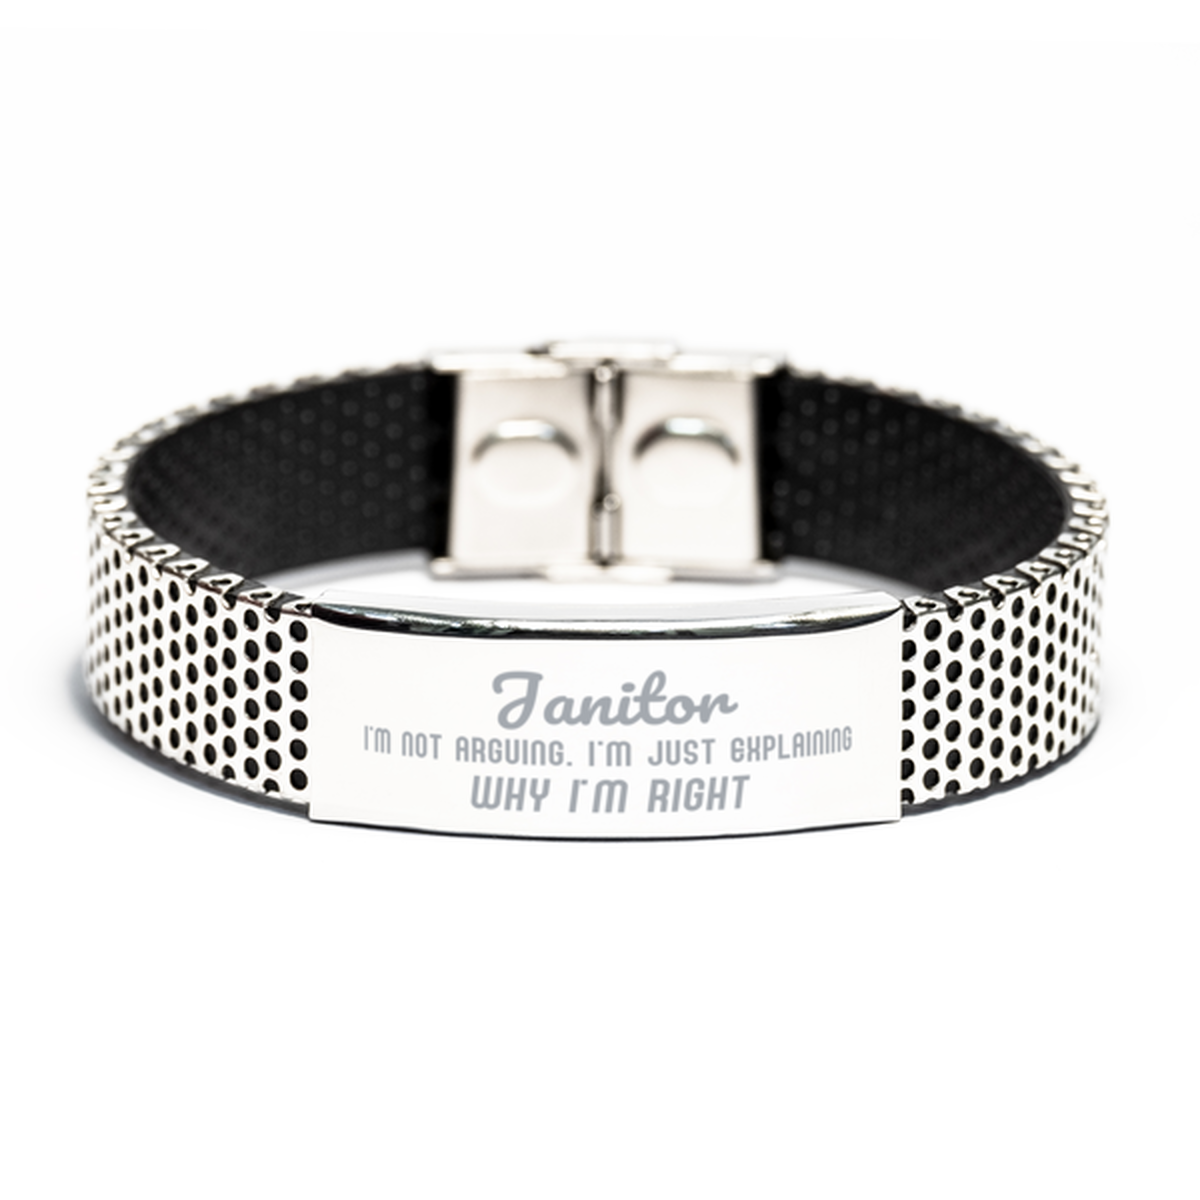 Janitor I'm not Arguing. I'm Just Explaining Why I'm RIGHT Stainless Steel Bracelet, Funny Saying Quote Janitor Gifts For Janitor Graduation Birthday Christmas Gifts for Men Women Coworker